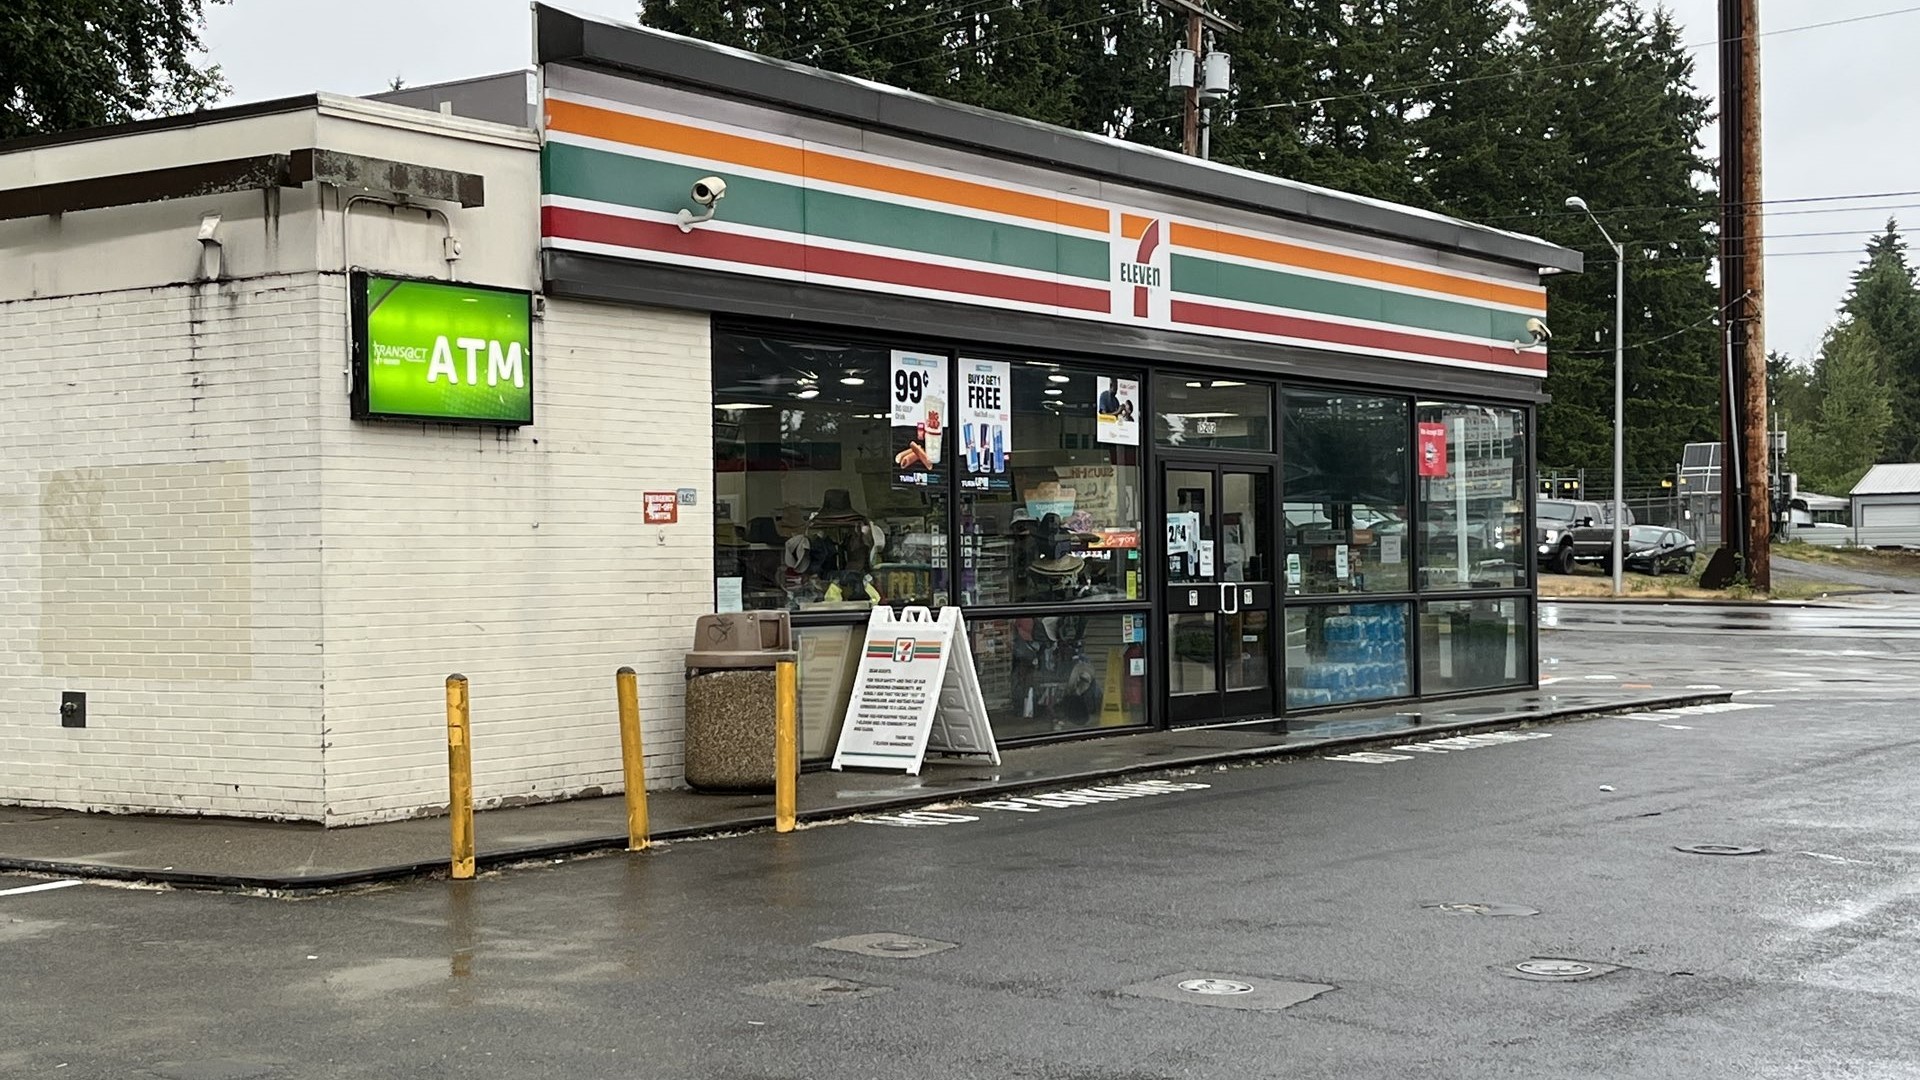 Pierce County Sheriff’s Department said the 7-Eleven in the South Hill area of Puyallup was robbed at 5:30 a.m. by three suspects who fled in a vehicle.